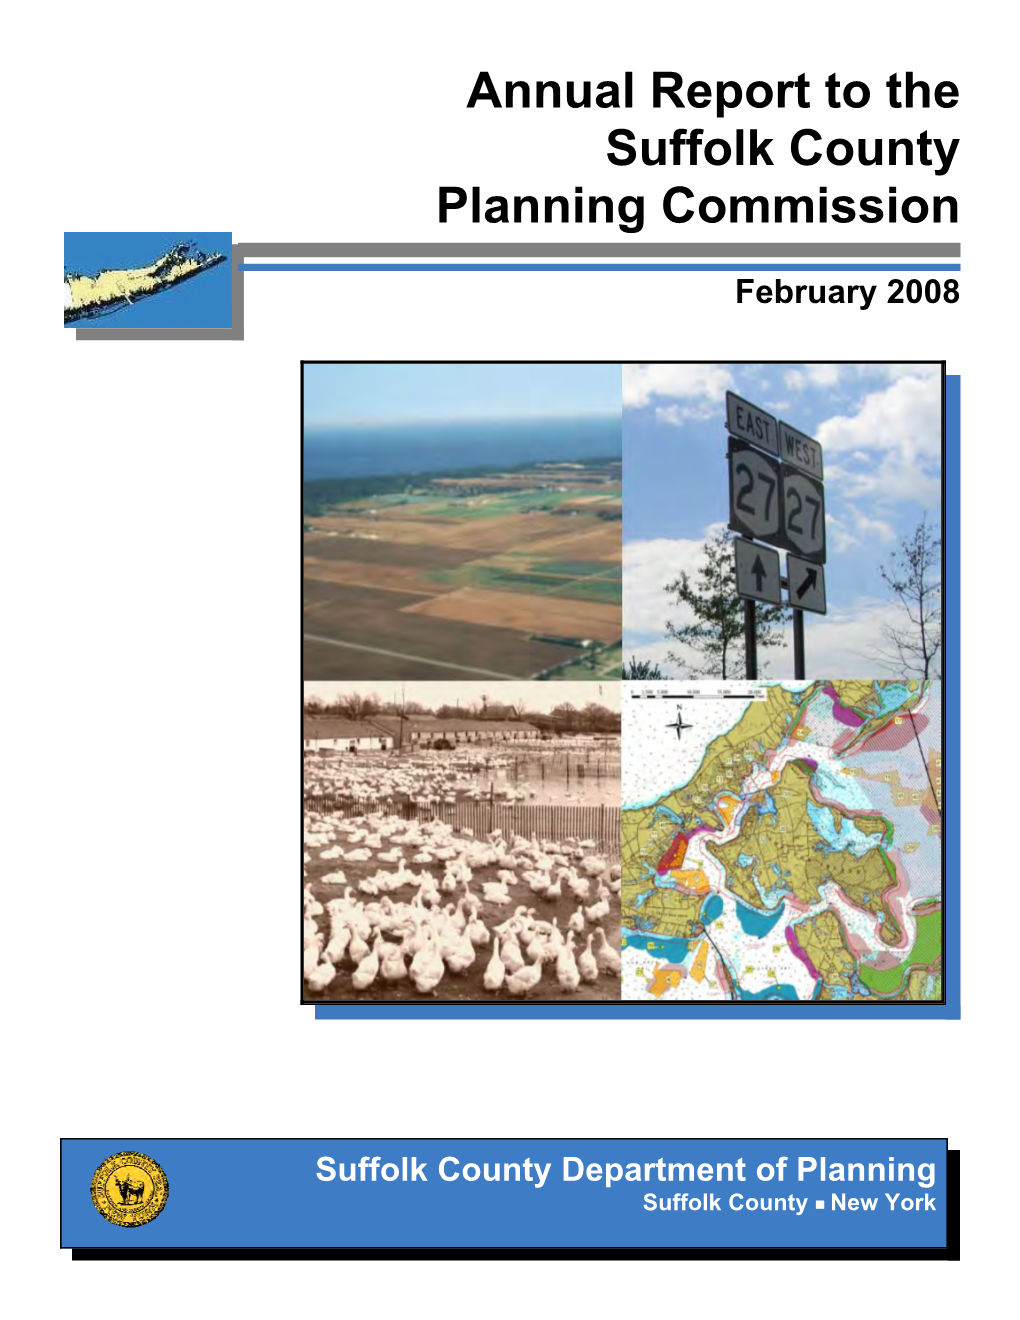 Annual Report to the Suffolk County Planning Commission